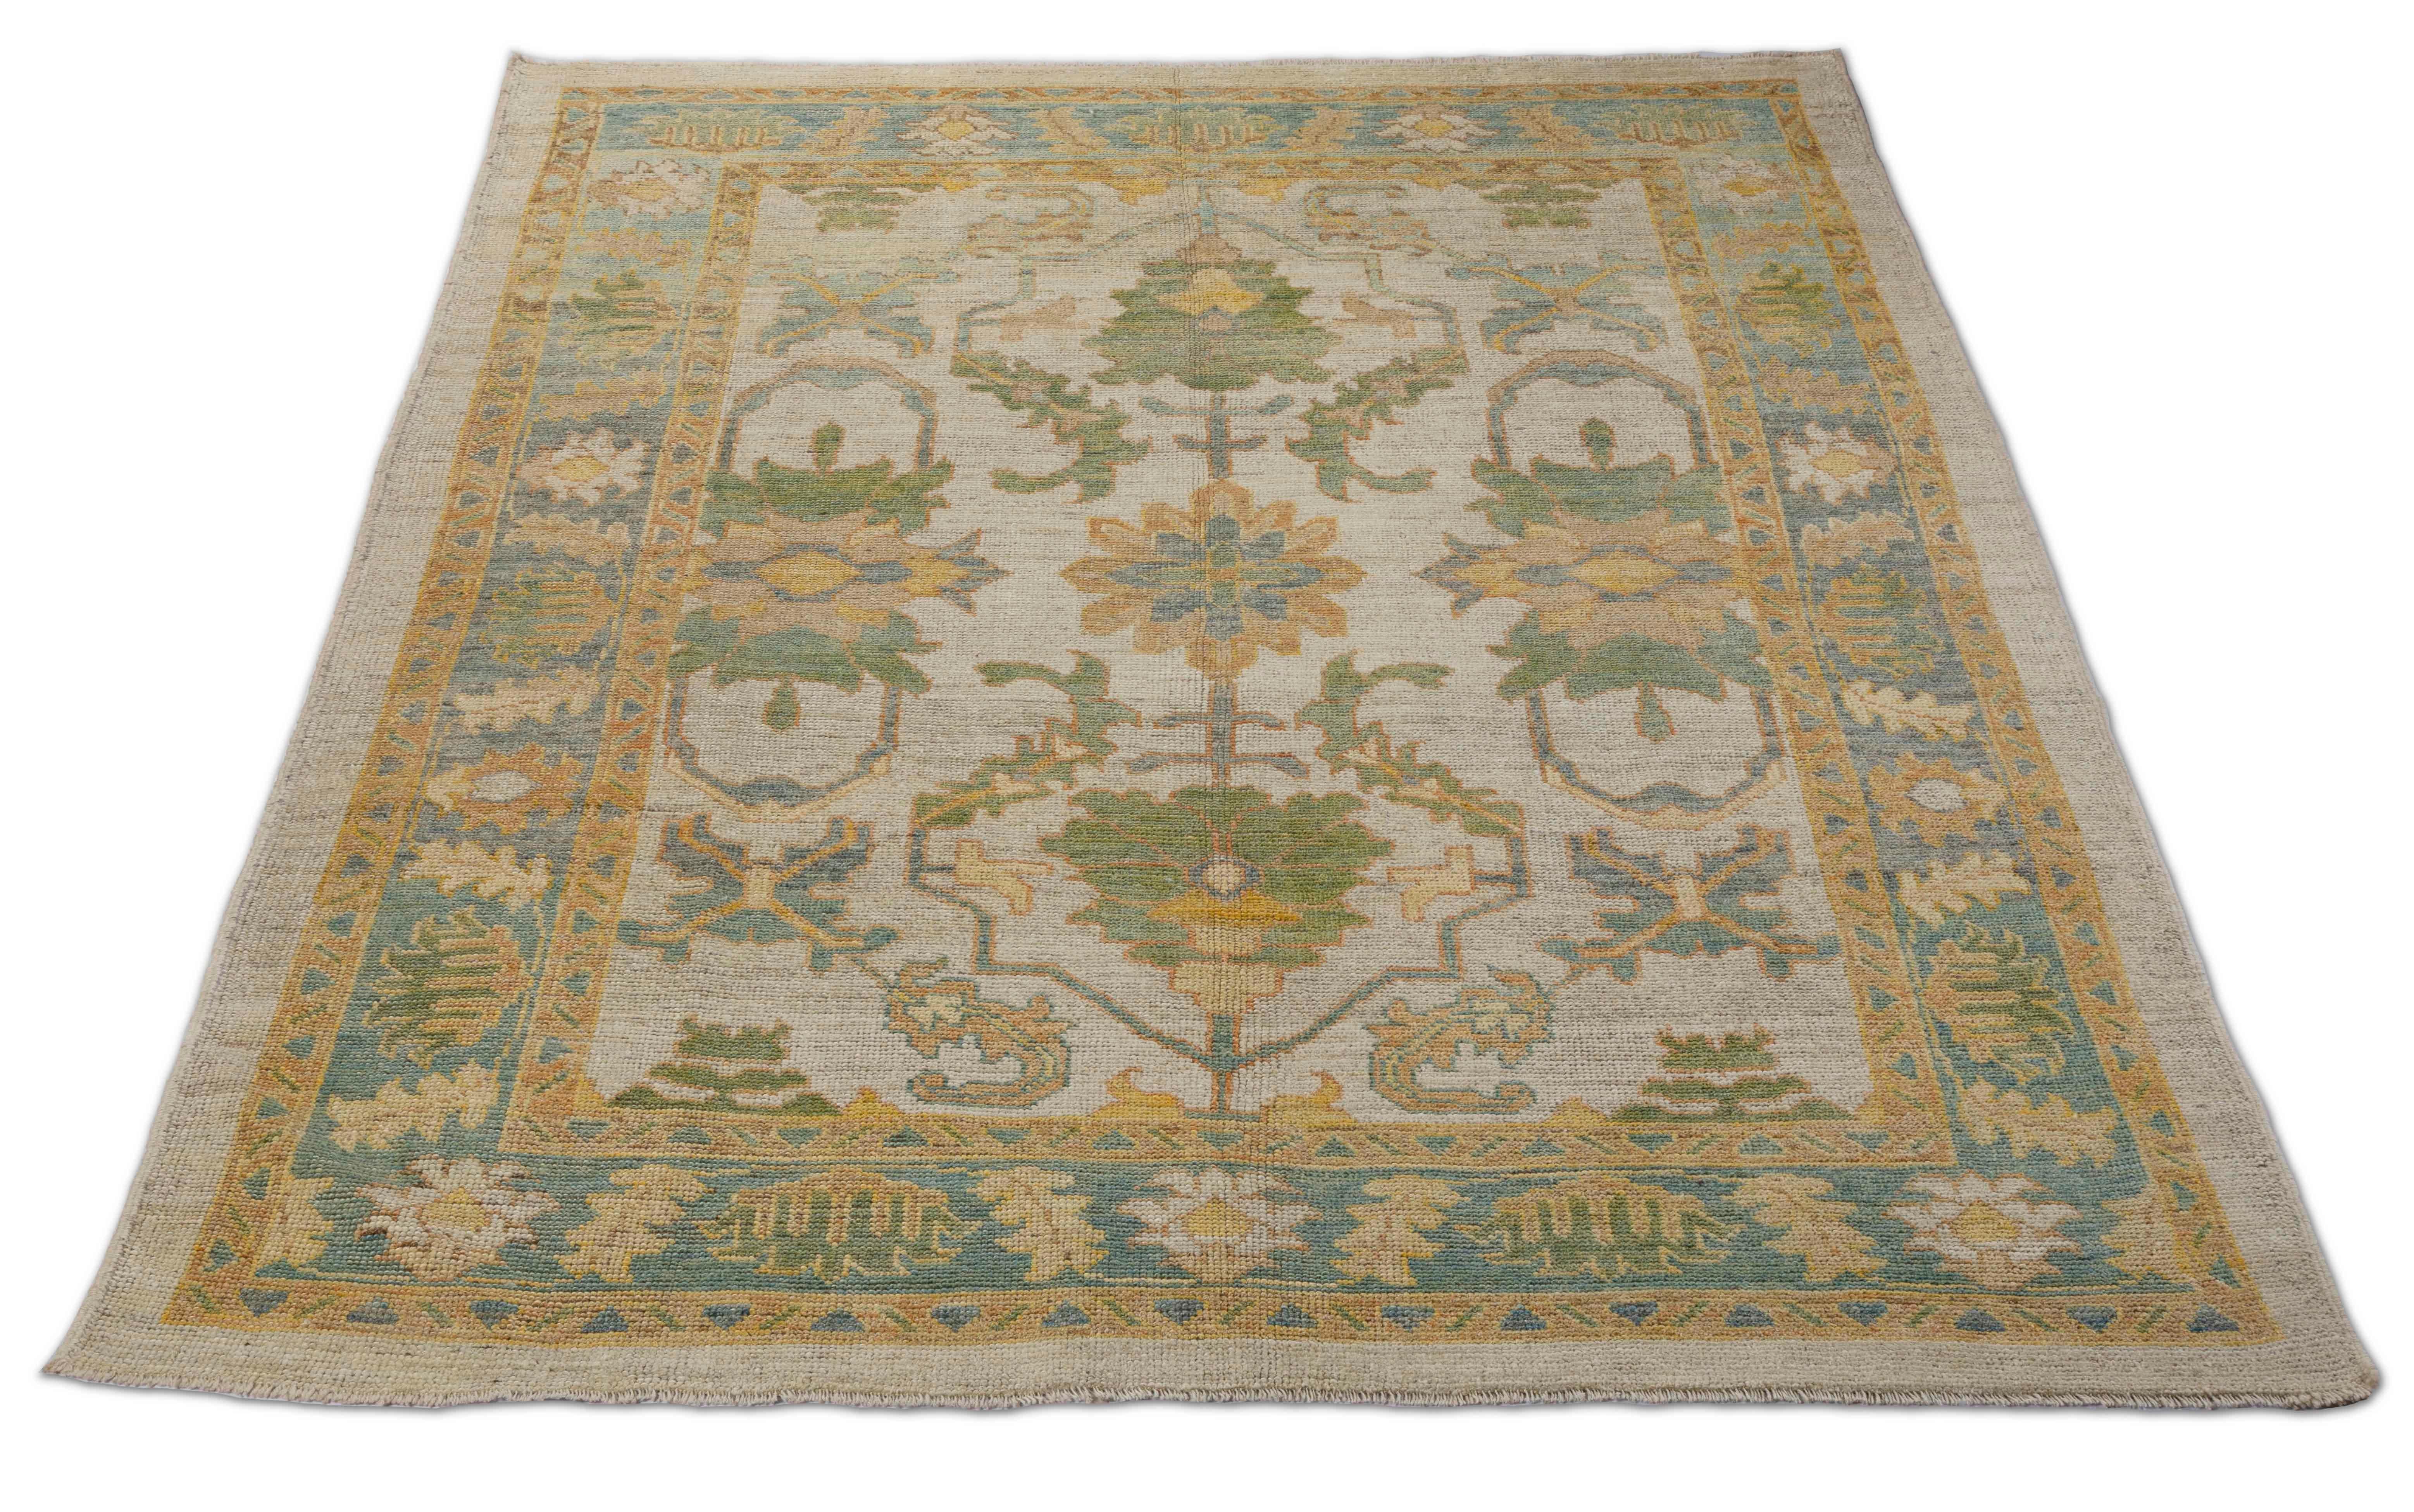 New Turkish rug made of handwoven sheep’s wool of the finest quality. It’s colored with organic vegetable dyes that are certified safe for humans and pets alike. It features a large, beige field with flower details allover in green and blue